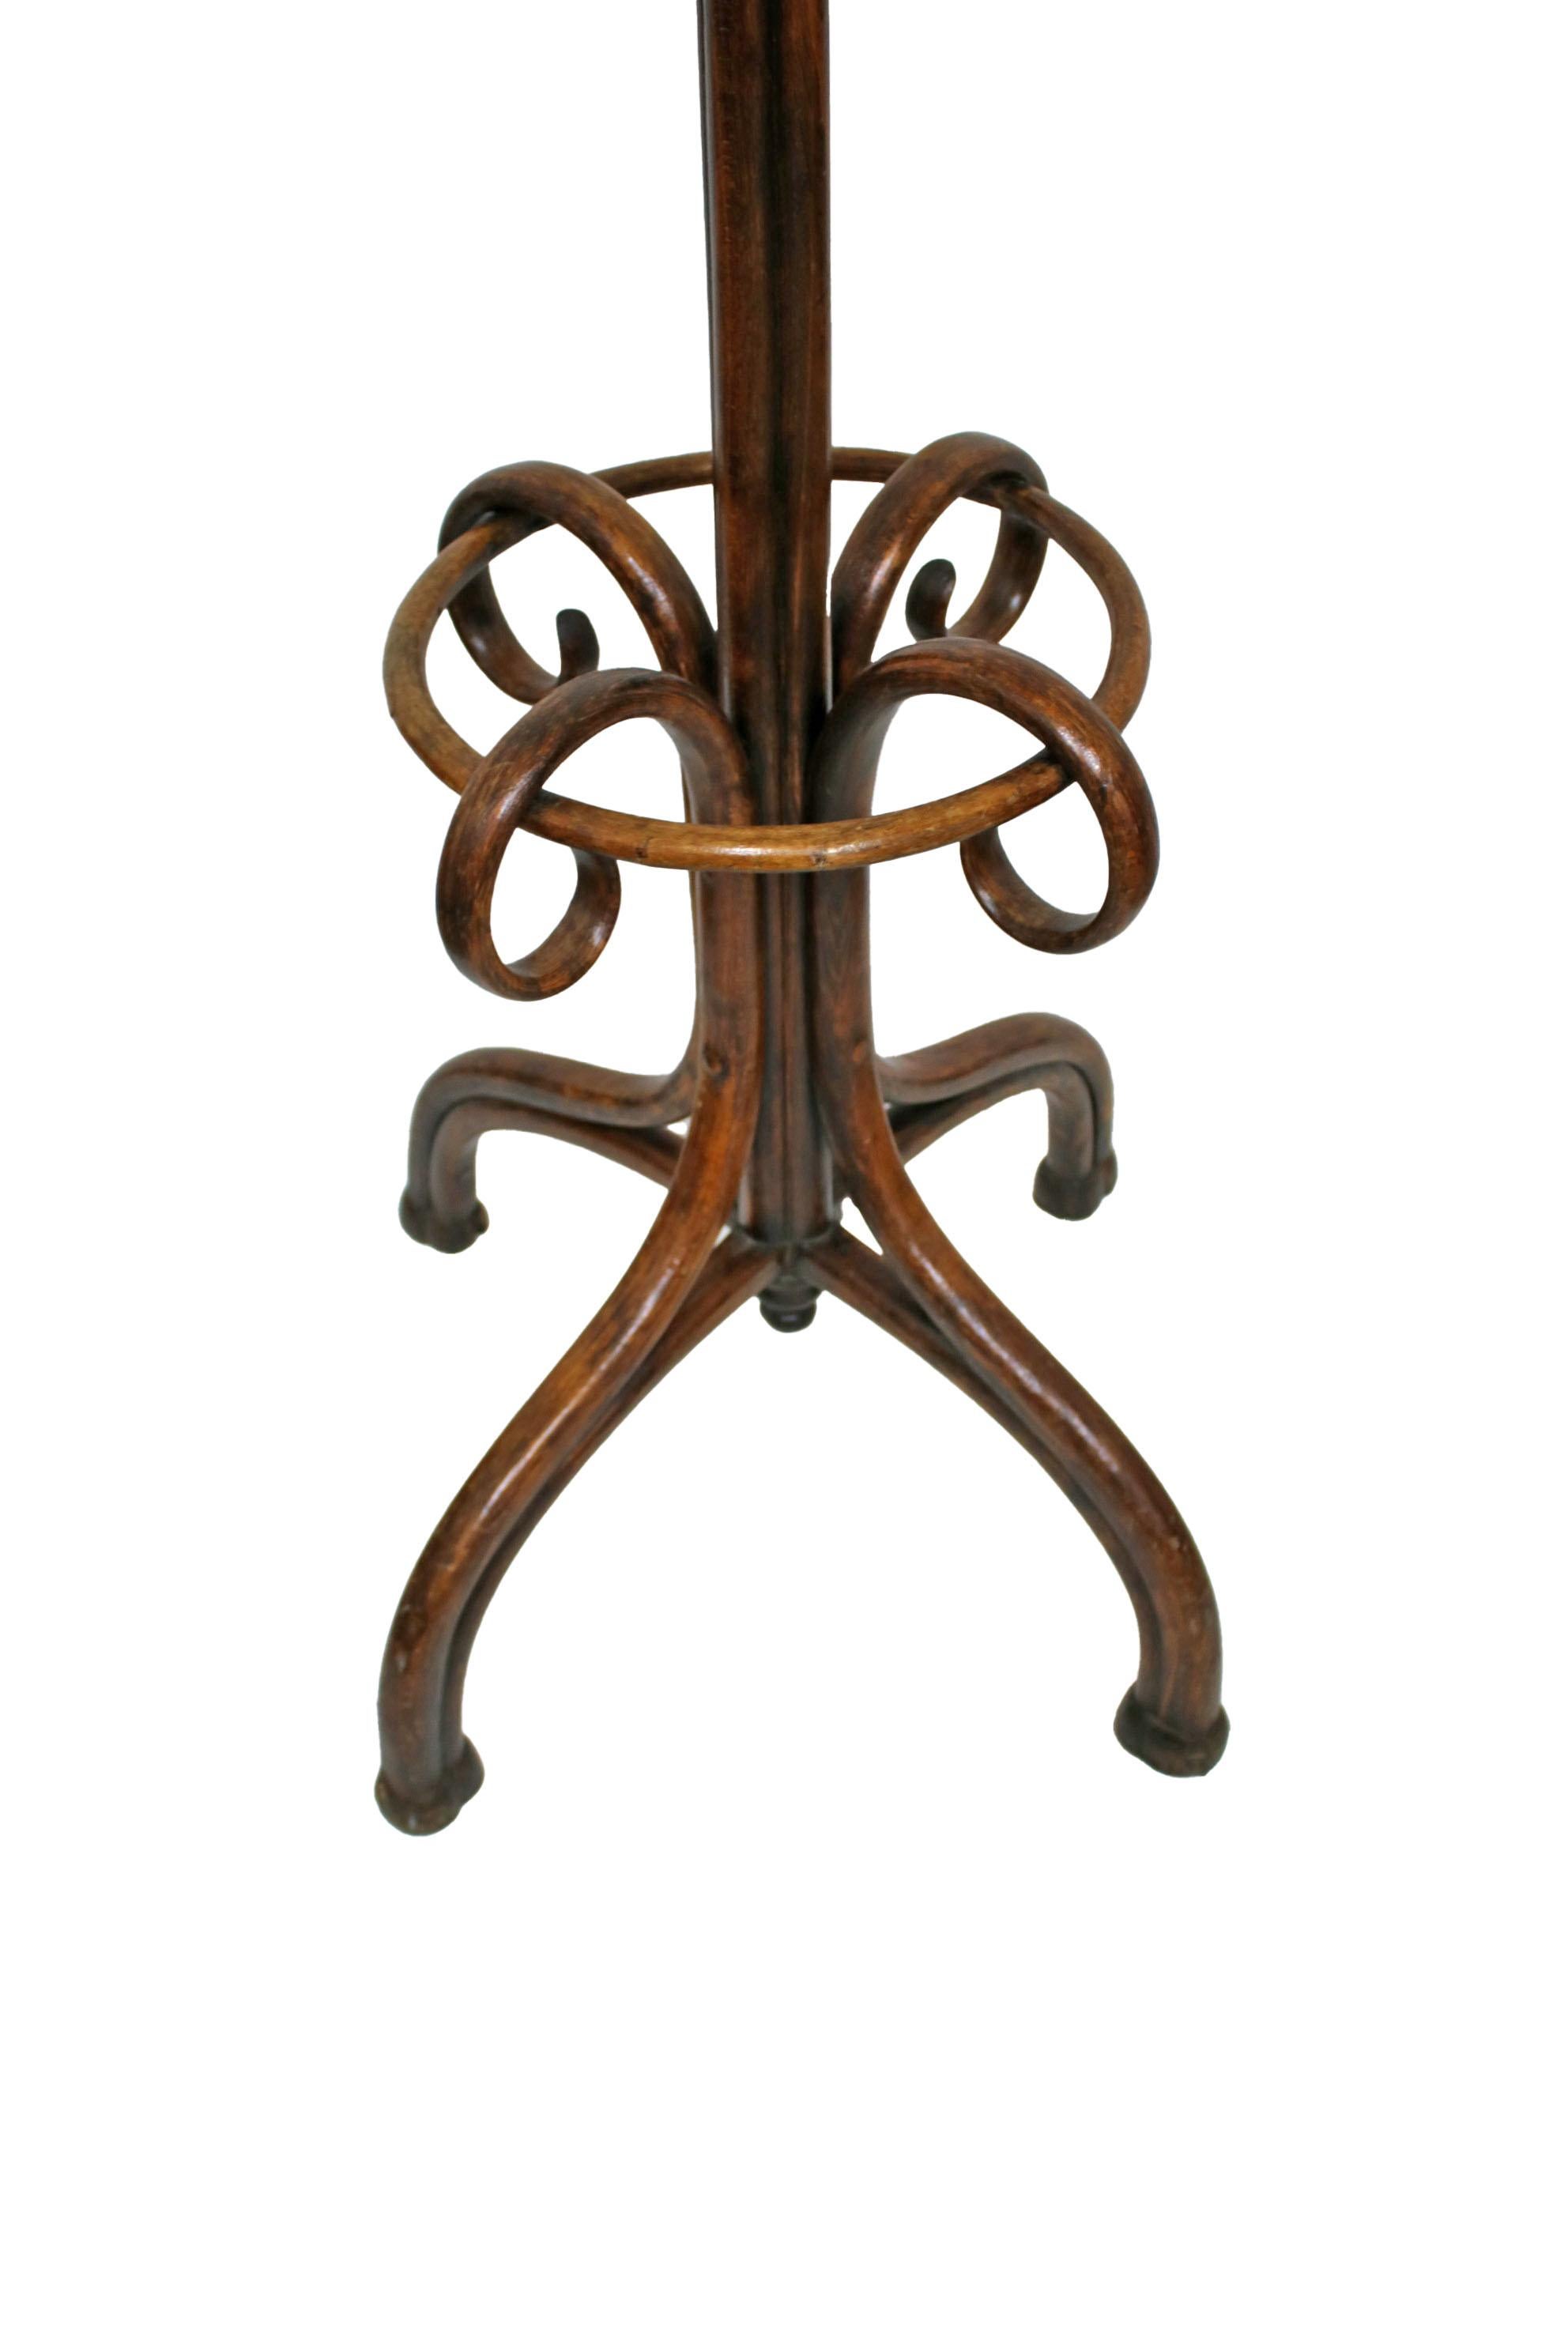 A beautiful bentwood coat hanger manufacturd by the famed Thonet Brothers in Vienna. It is suitable to anz ante room with period furniture. The coat hanger is in original condition.